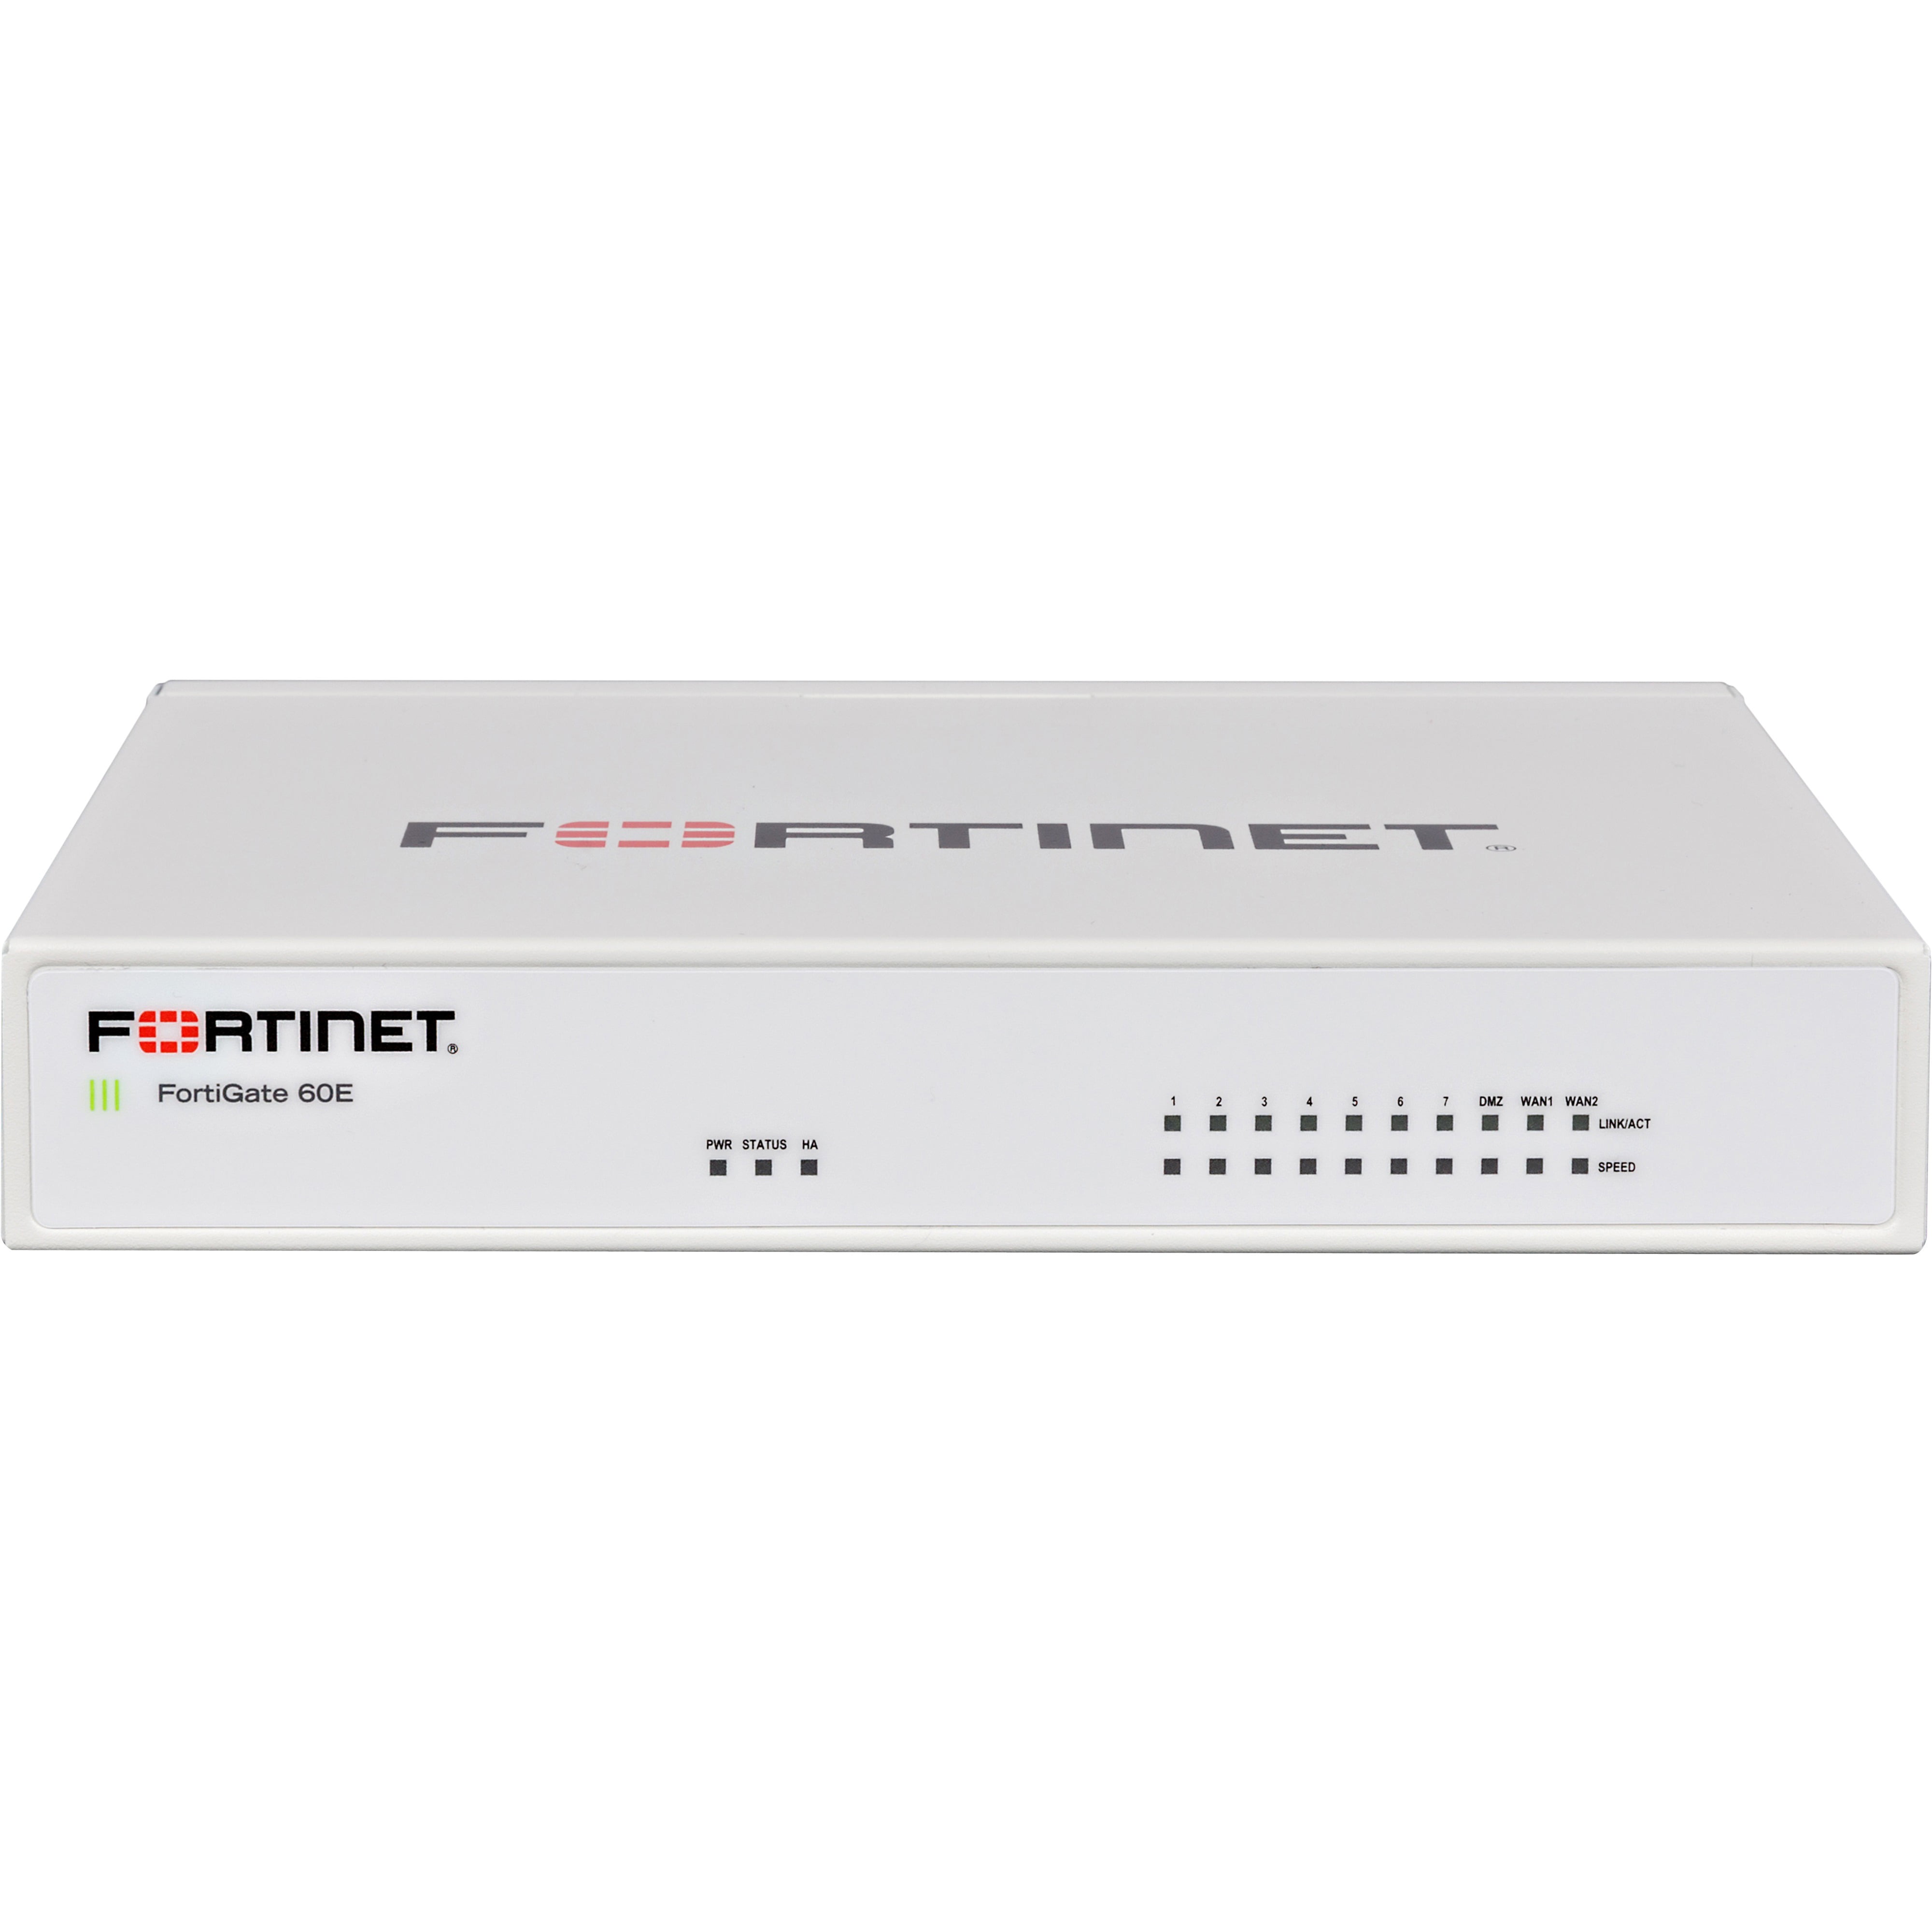 fortinet firewall appliance review